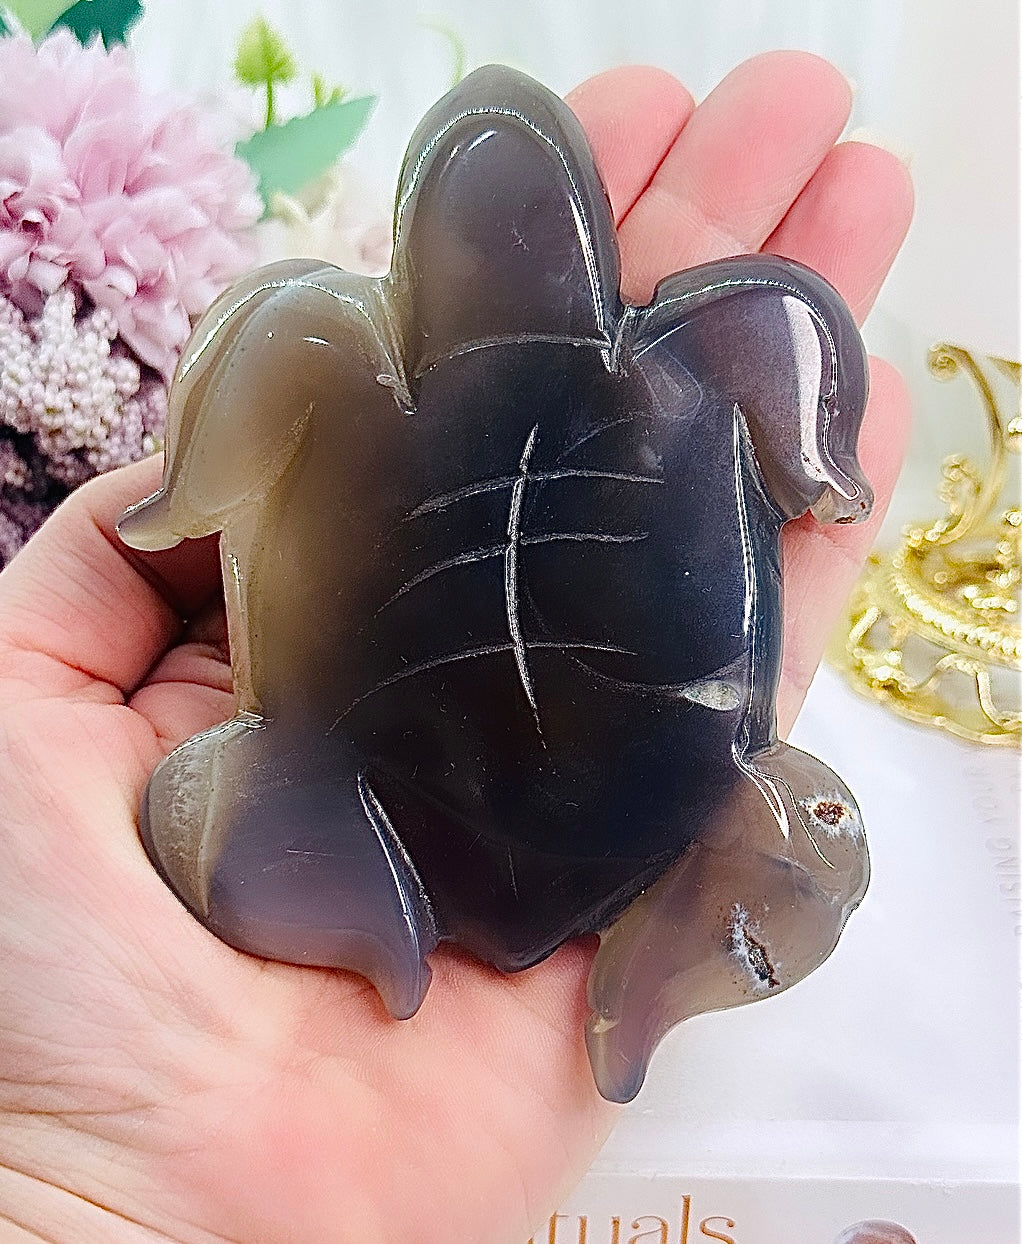 Gorgeous Druzy Agate Carved Turtle